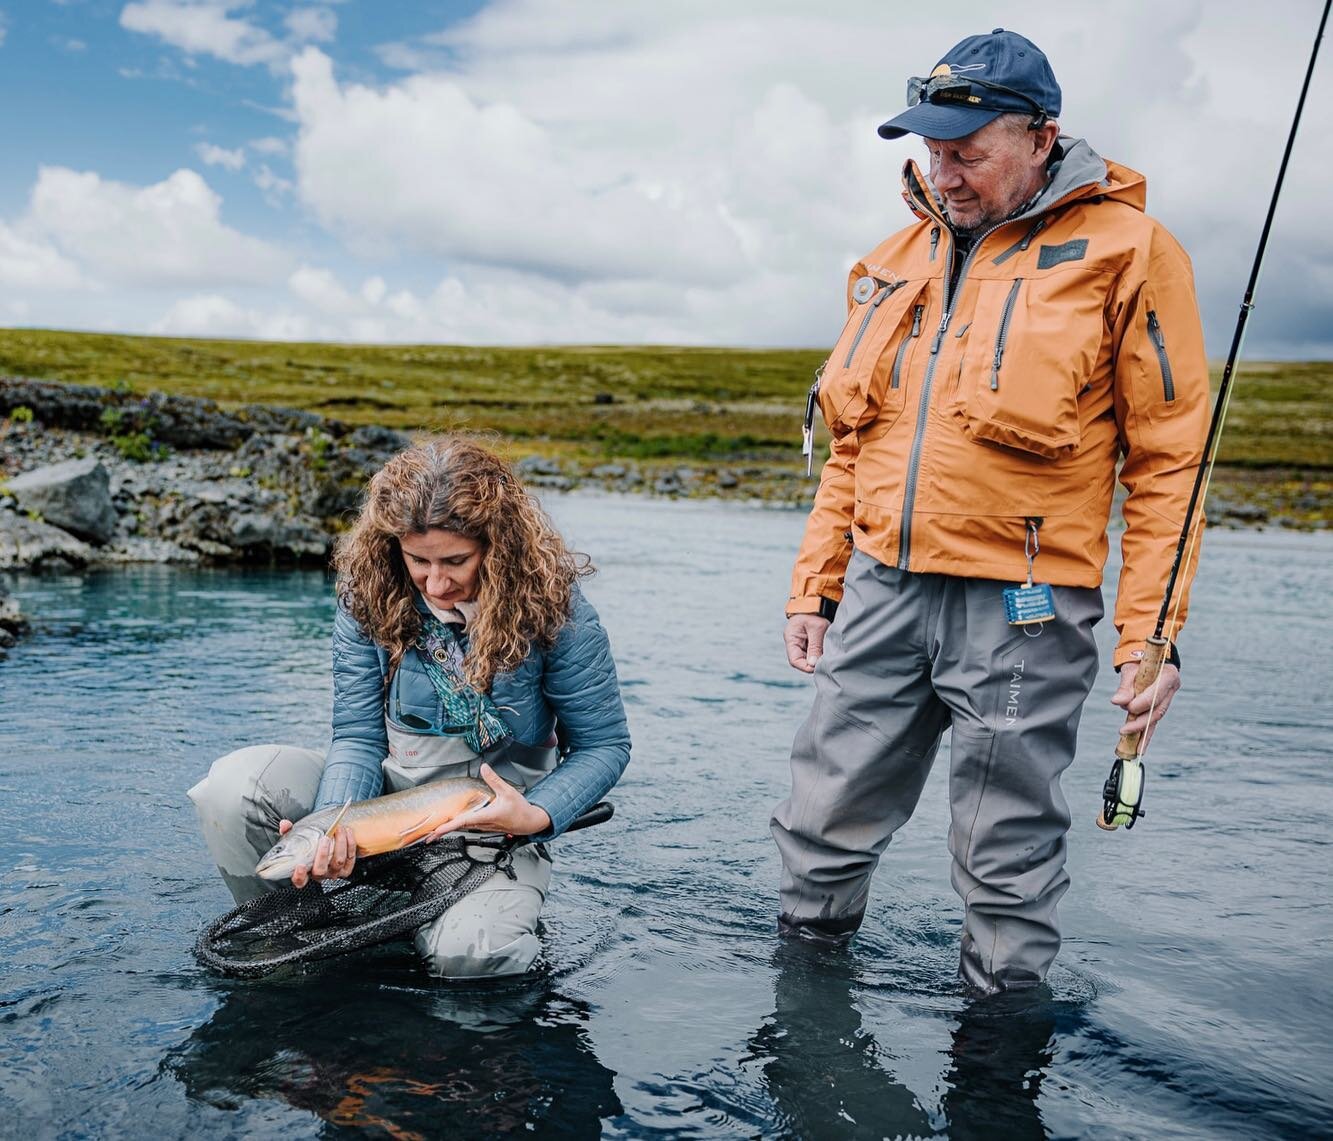 Iceland Fly Fishing 2022, Day 2! After a quick breakfast at the lodge, we departed with @oligudmundsson17 on the hunt for Arctic char. Our first stop gave us the chance to sight-fish; strike indicators were used, but nearly every fish I caught was wa